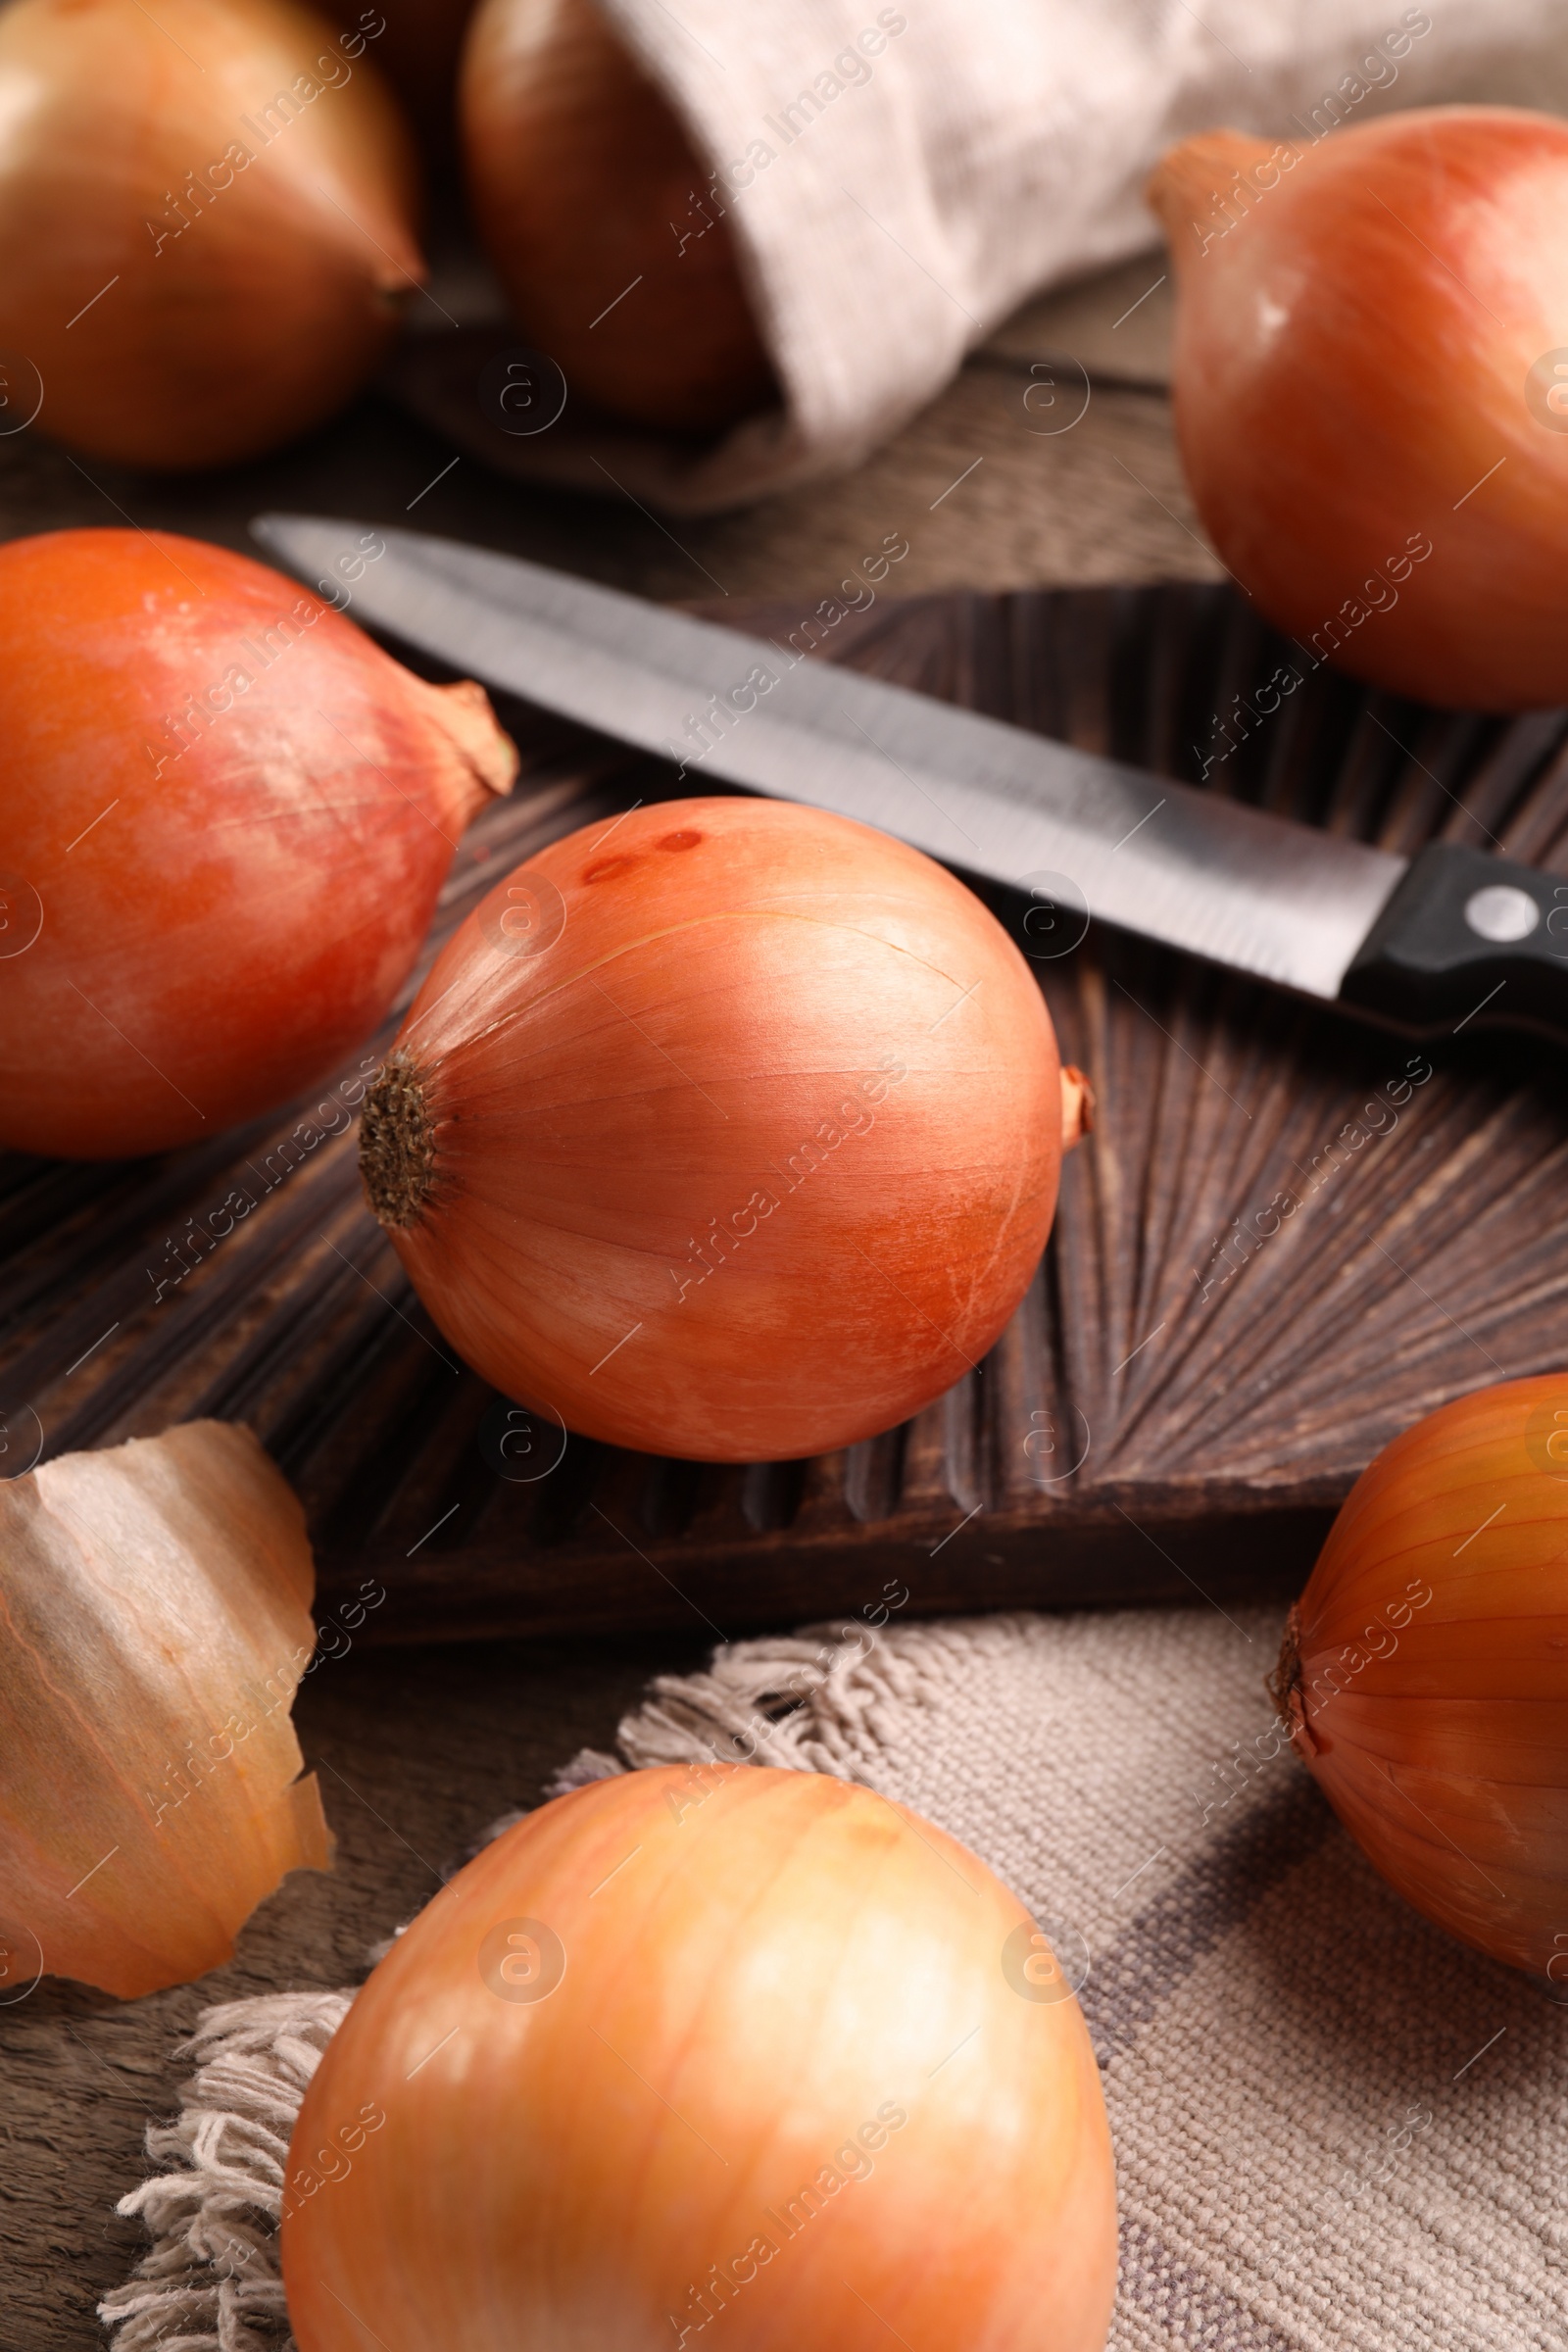 Photo of Many ripe onions and knife on wooden table, closeup